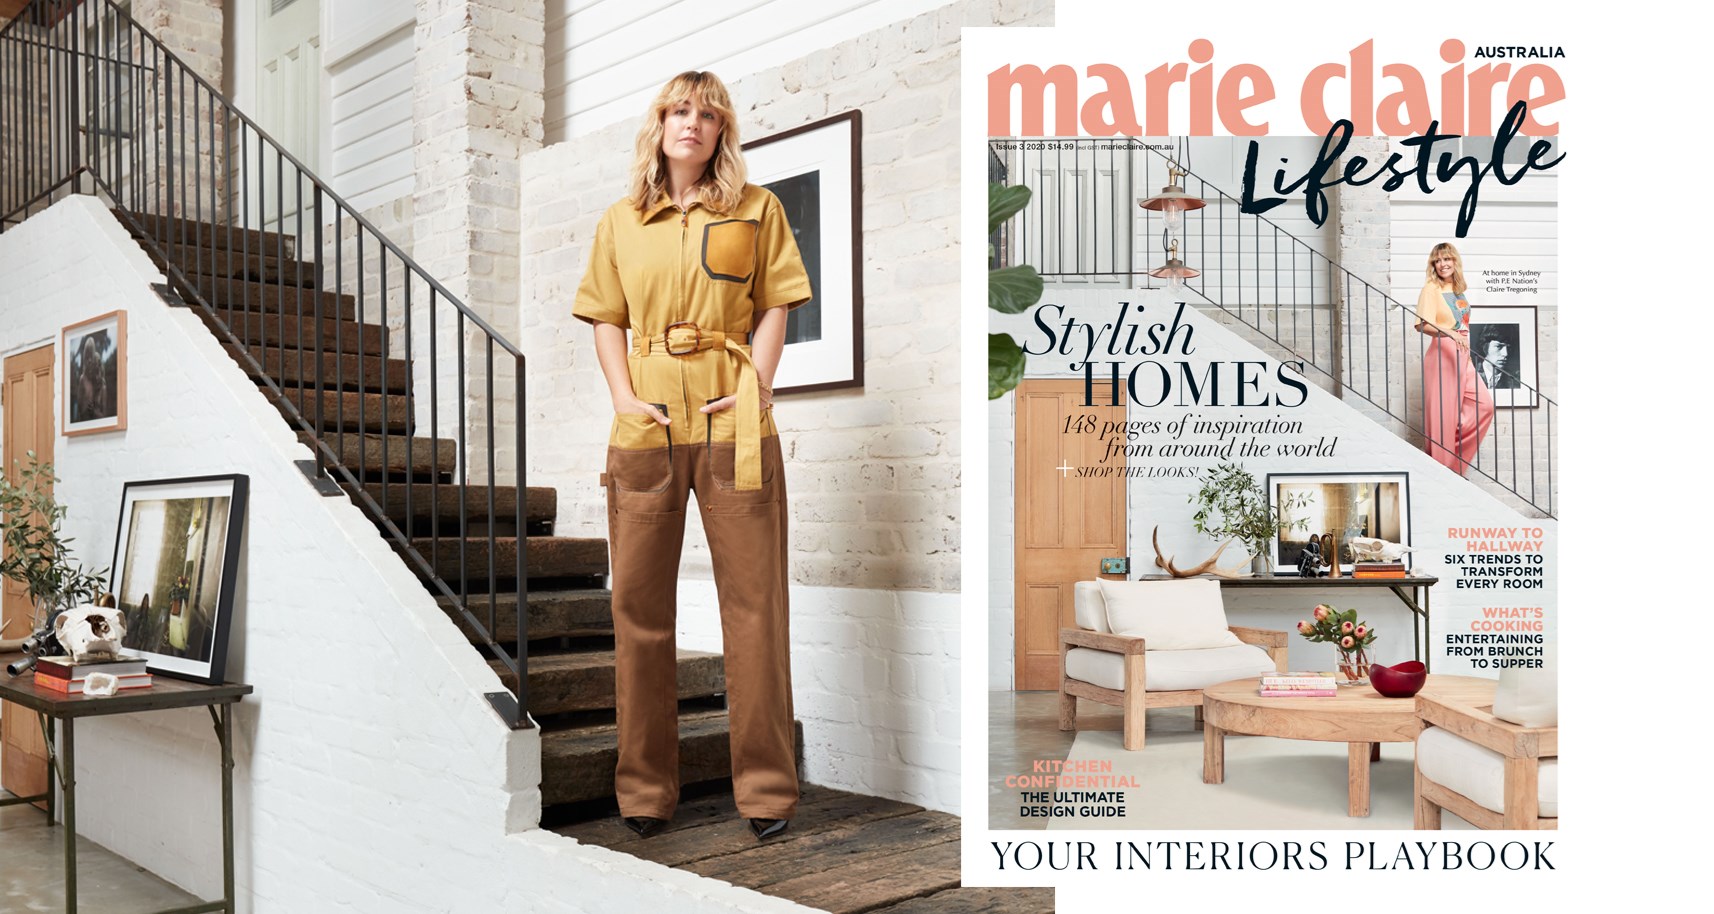 House Goals: marie claire Lifestyle’s Latest Issue Is Out Now With P.E. Nation’s Claire Tregoning On The Cover